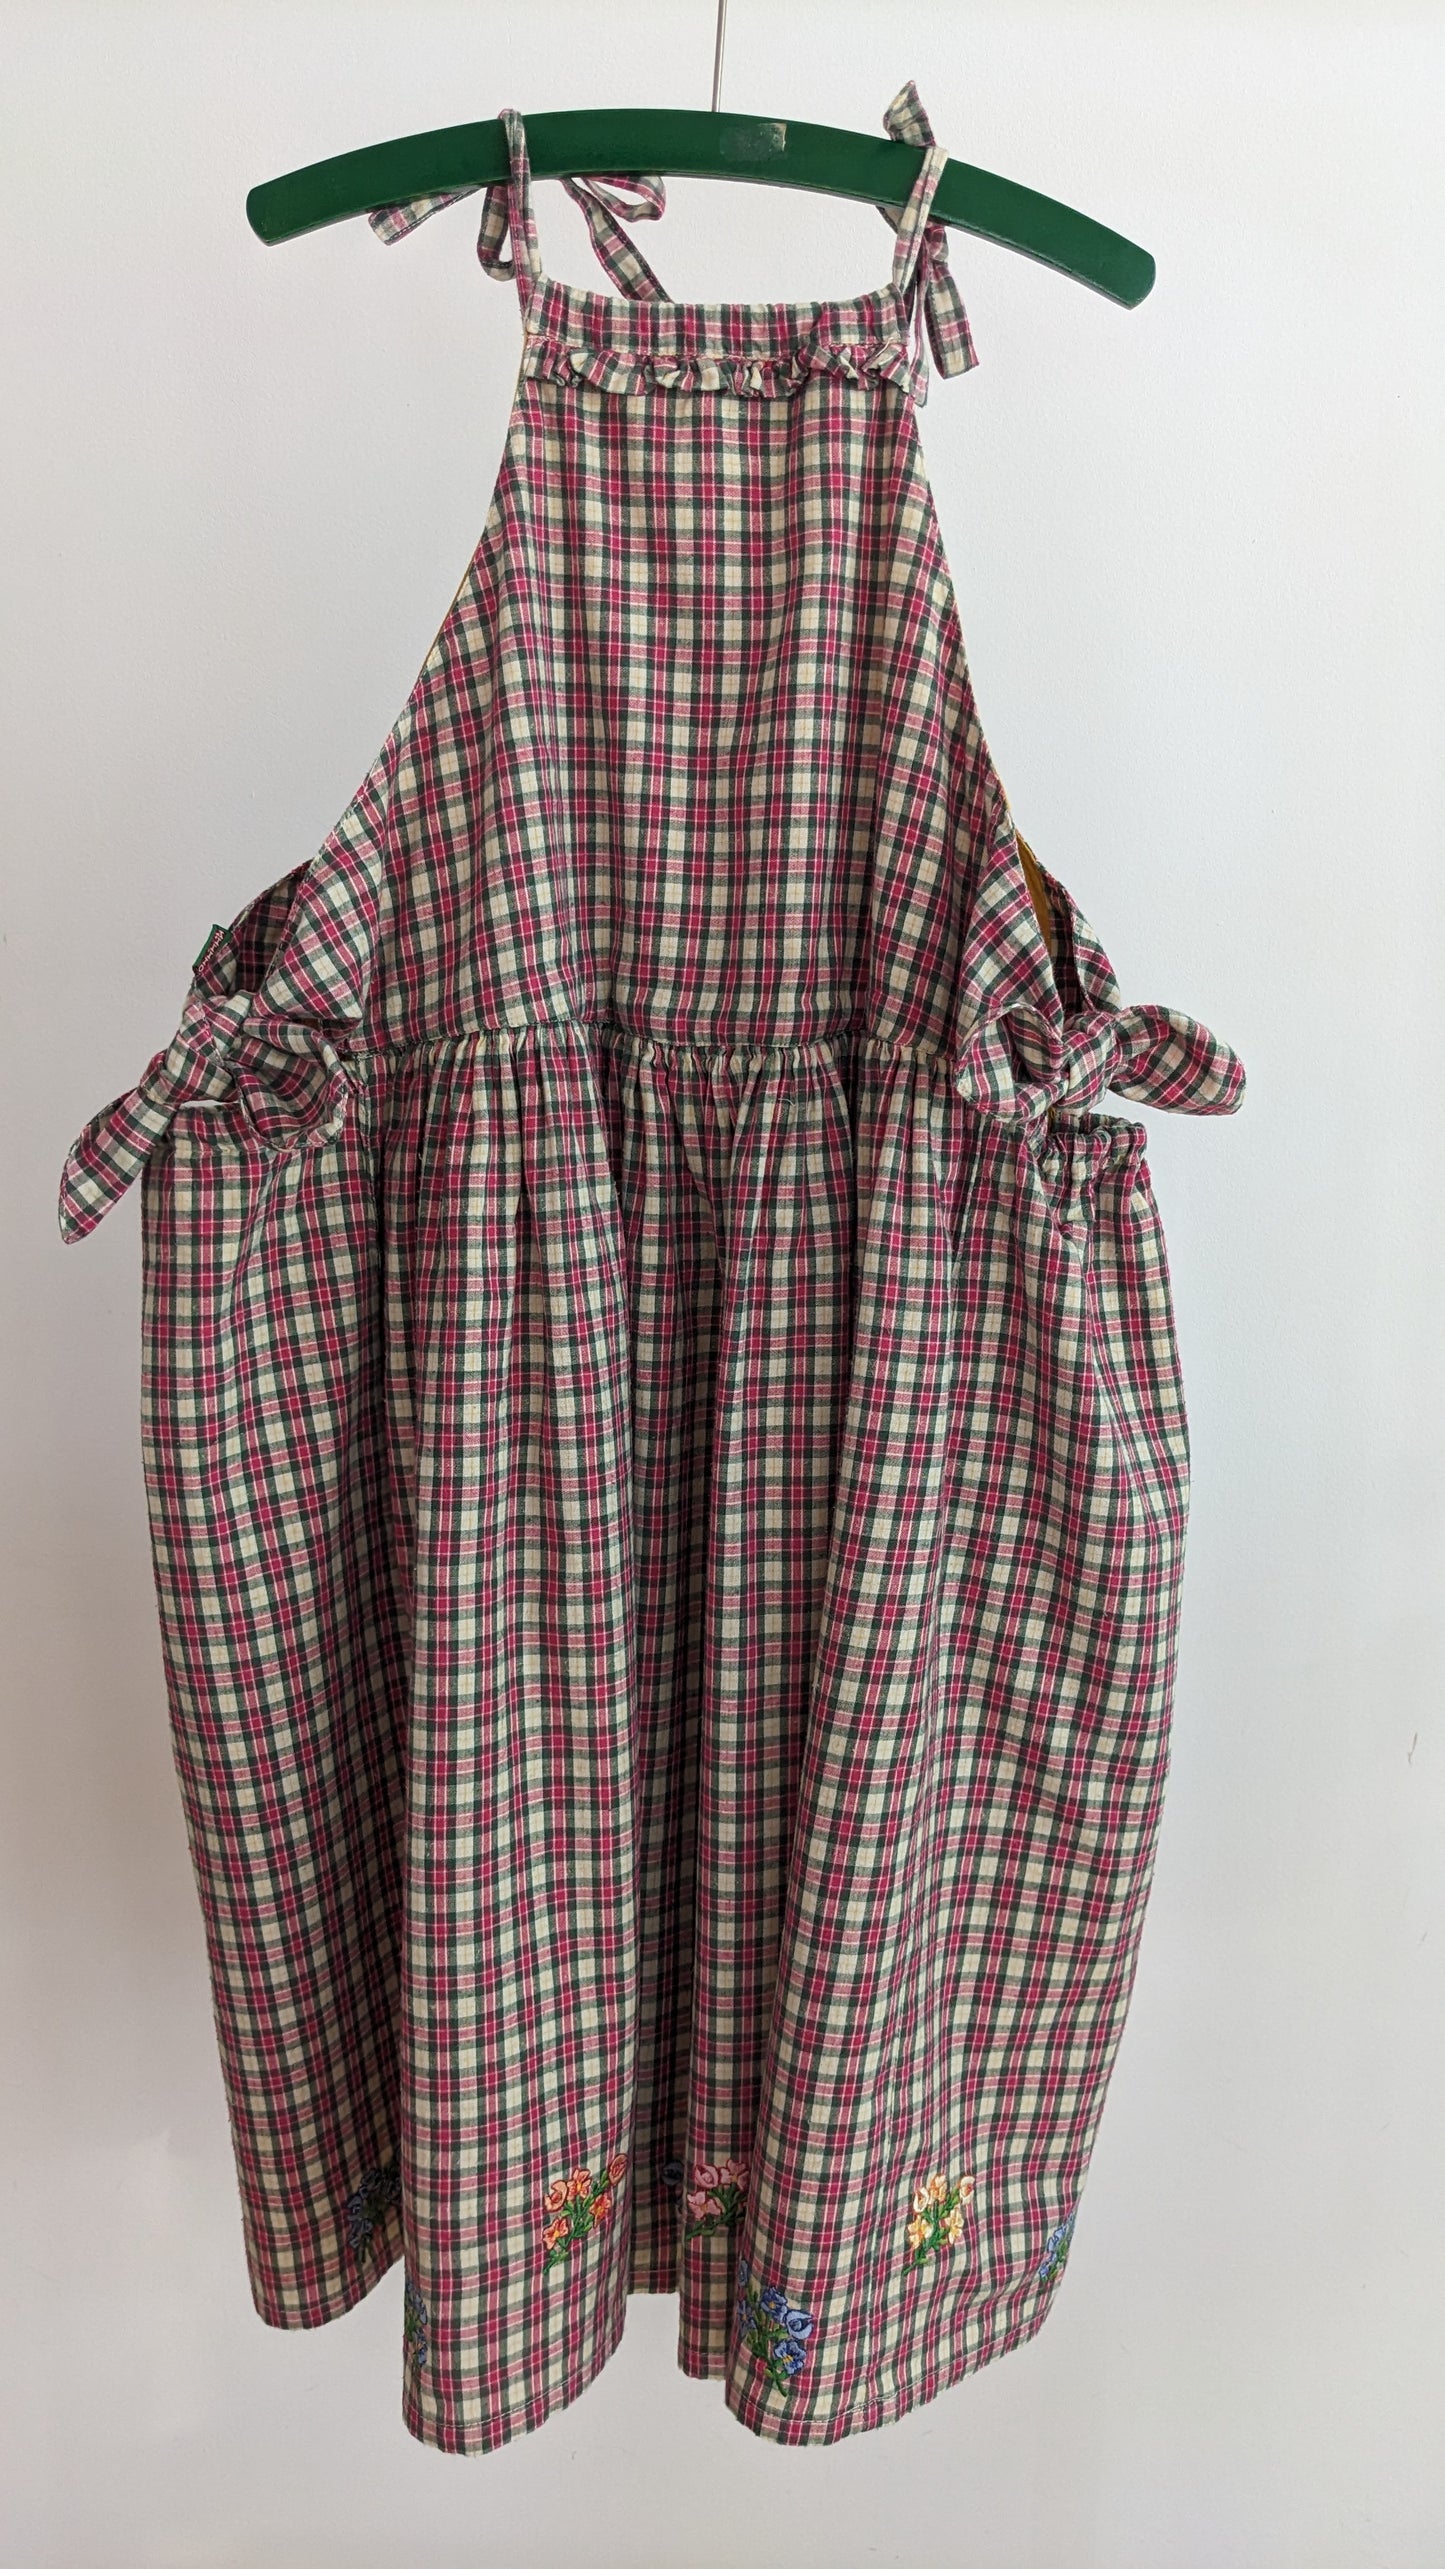 Oilily overall check dress